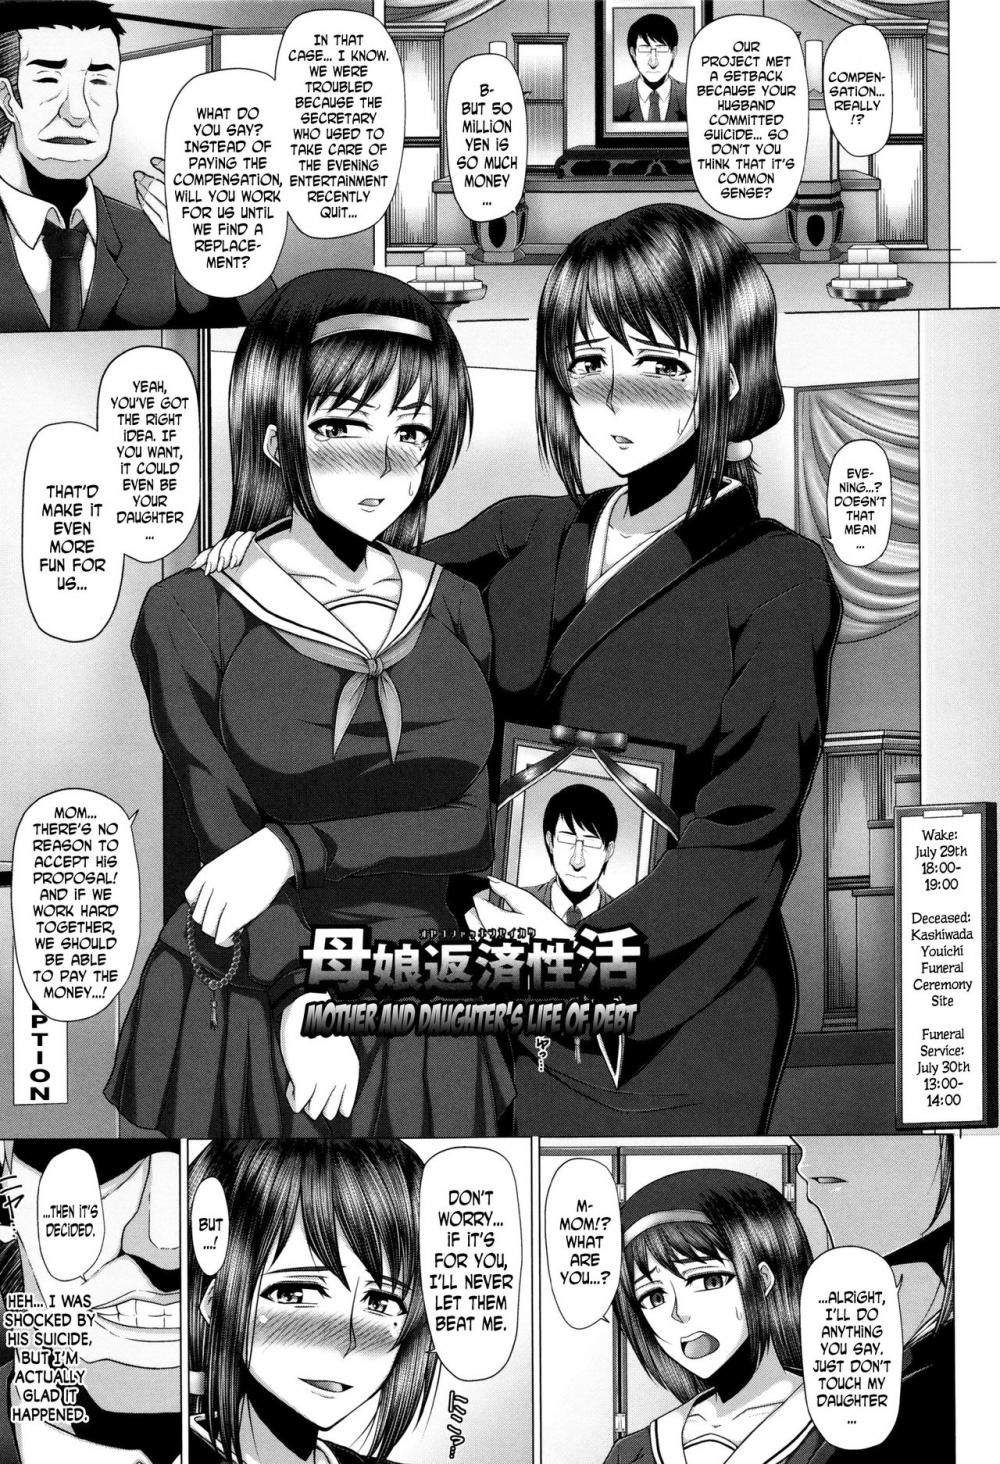 Hentai Black Bitch - Black GAL IMMORAL 24H Convenience Store Bitch!!-Chapter 2-Hentai Manga  Hentai Comic - Online porn video at mobile